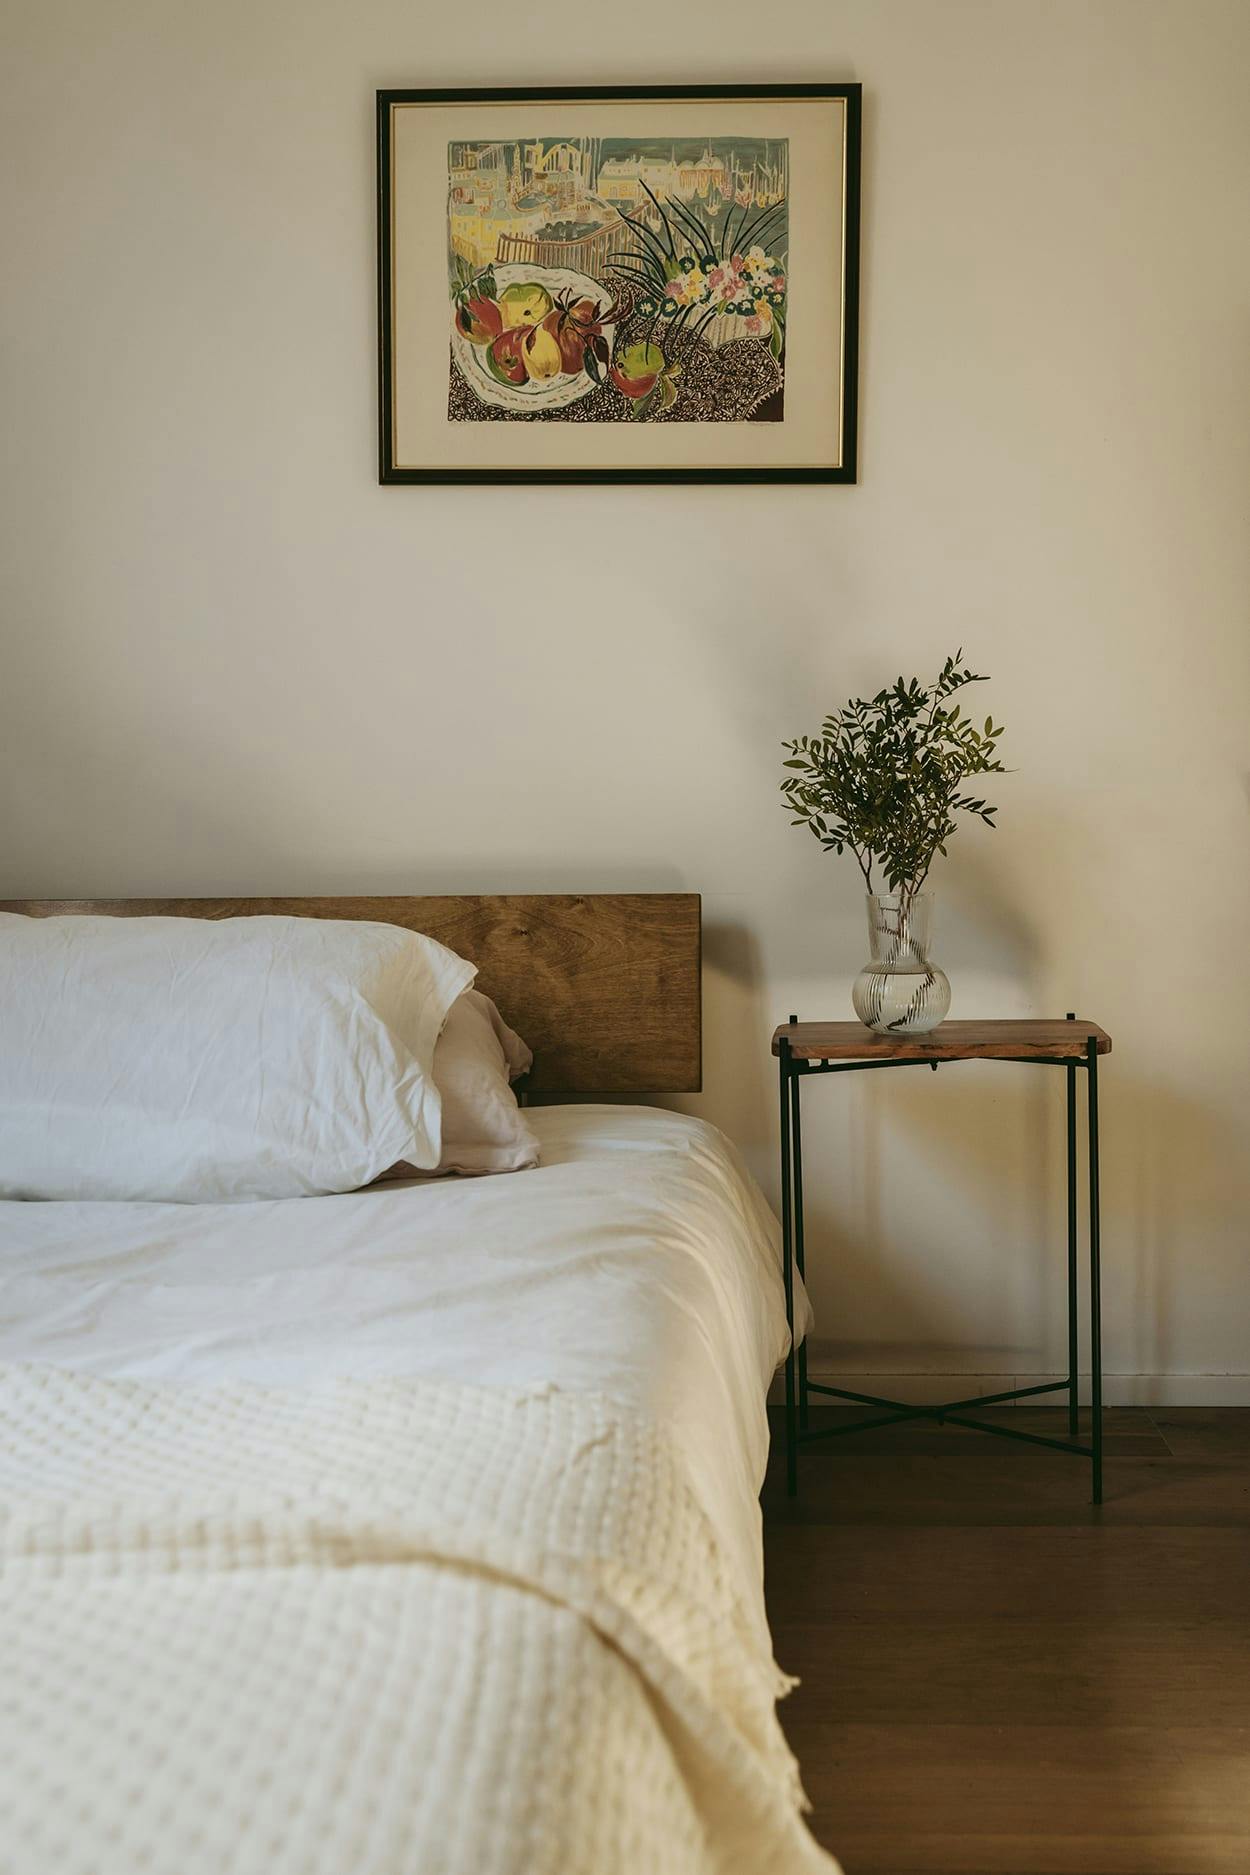 The image features a bedroom with a neatly made bed, a small table with a vase of flowers, and a painting on the wall.